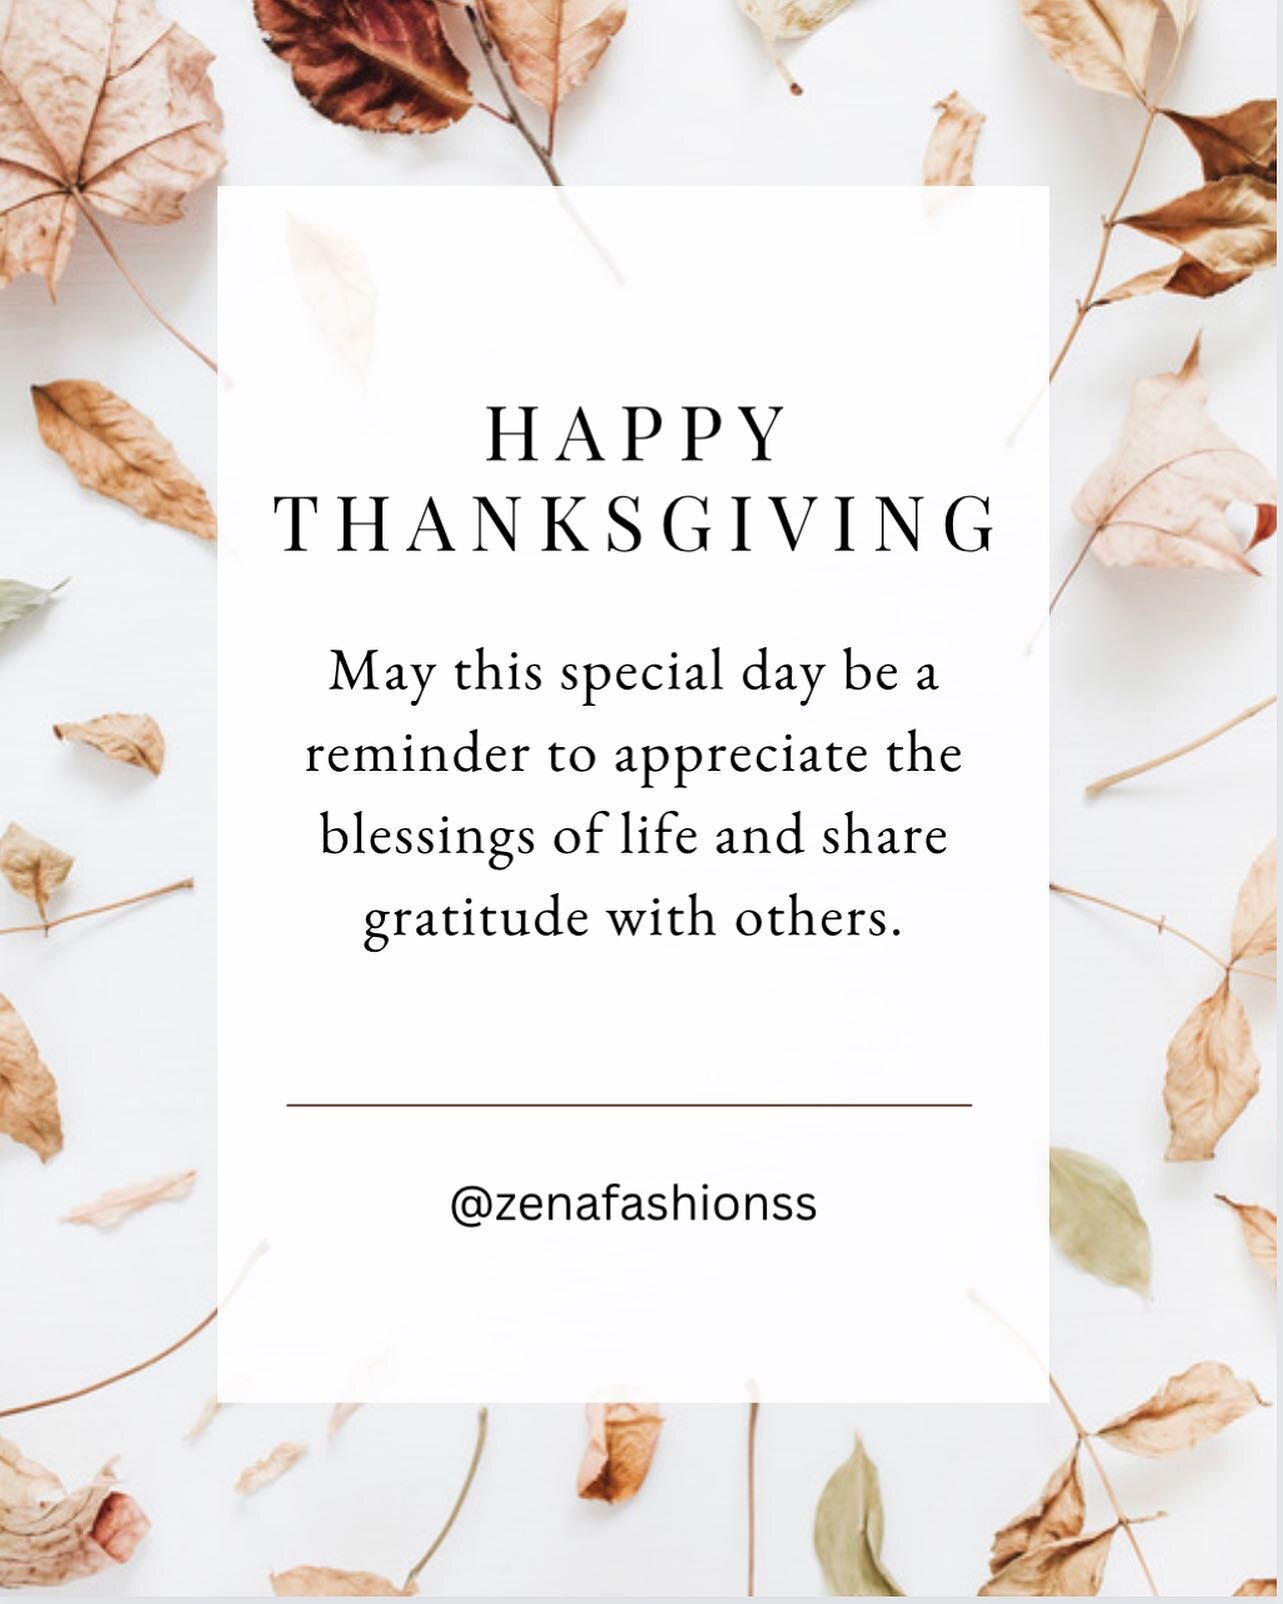 Happy Thanksgiving Everyone. We&rsquo;re grateful for the gift of life, and moreso the love and support you all continue to show this page. 🙏🏾🍂🍁
#CountingOurBlessings While #CountingTheCalories
😄🦃🍗🥧🍾🥂
.
.
.